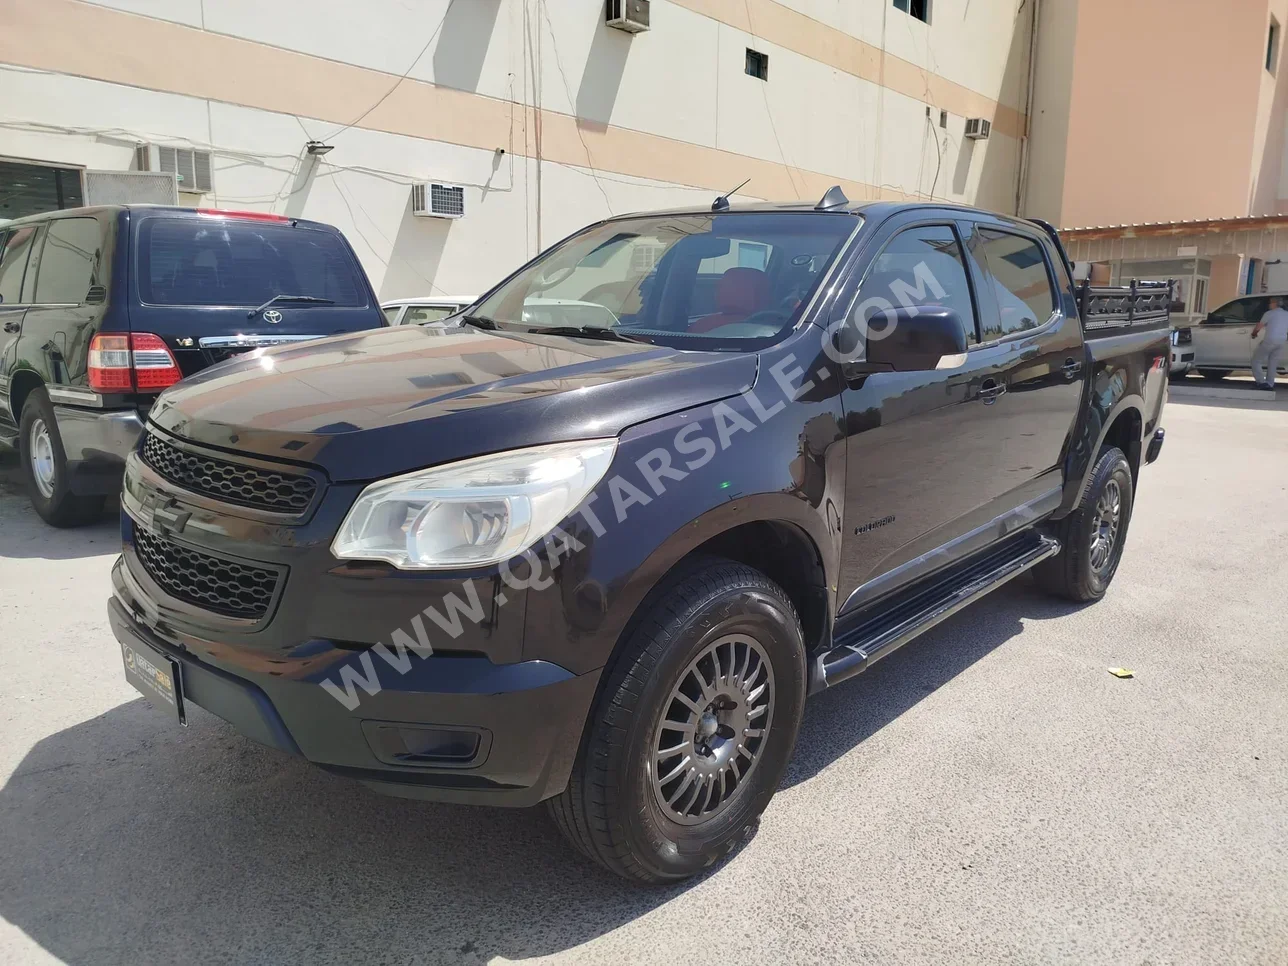 Chevrolet  Colorado  2013  Automatic  128,000 Km  4 Cylinder  Four Wheel Drive (4WD)  Pick Up  Black